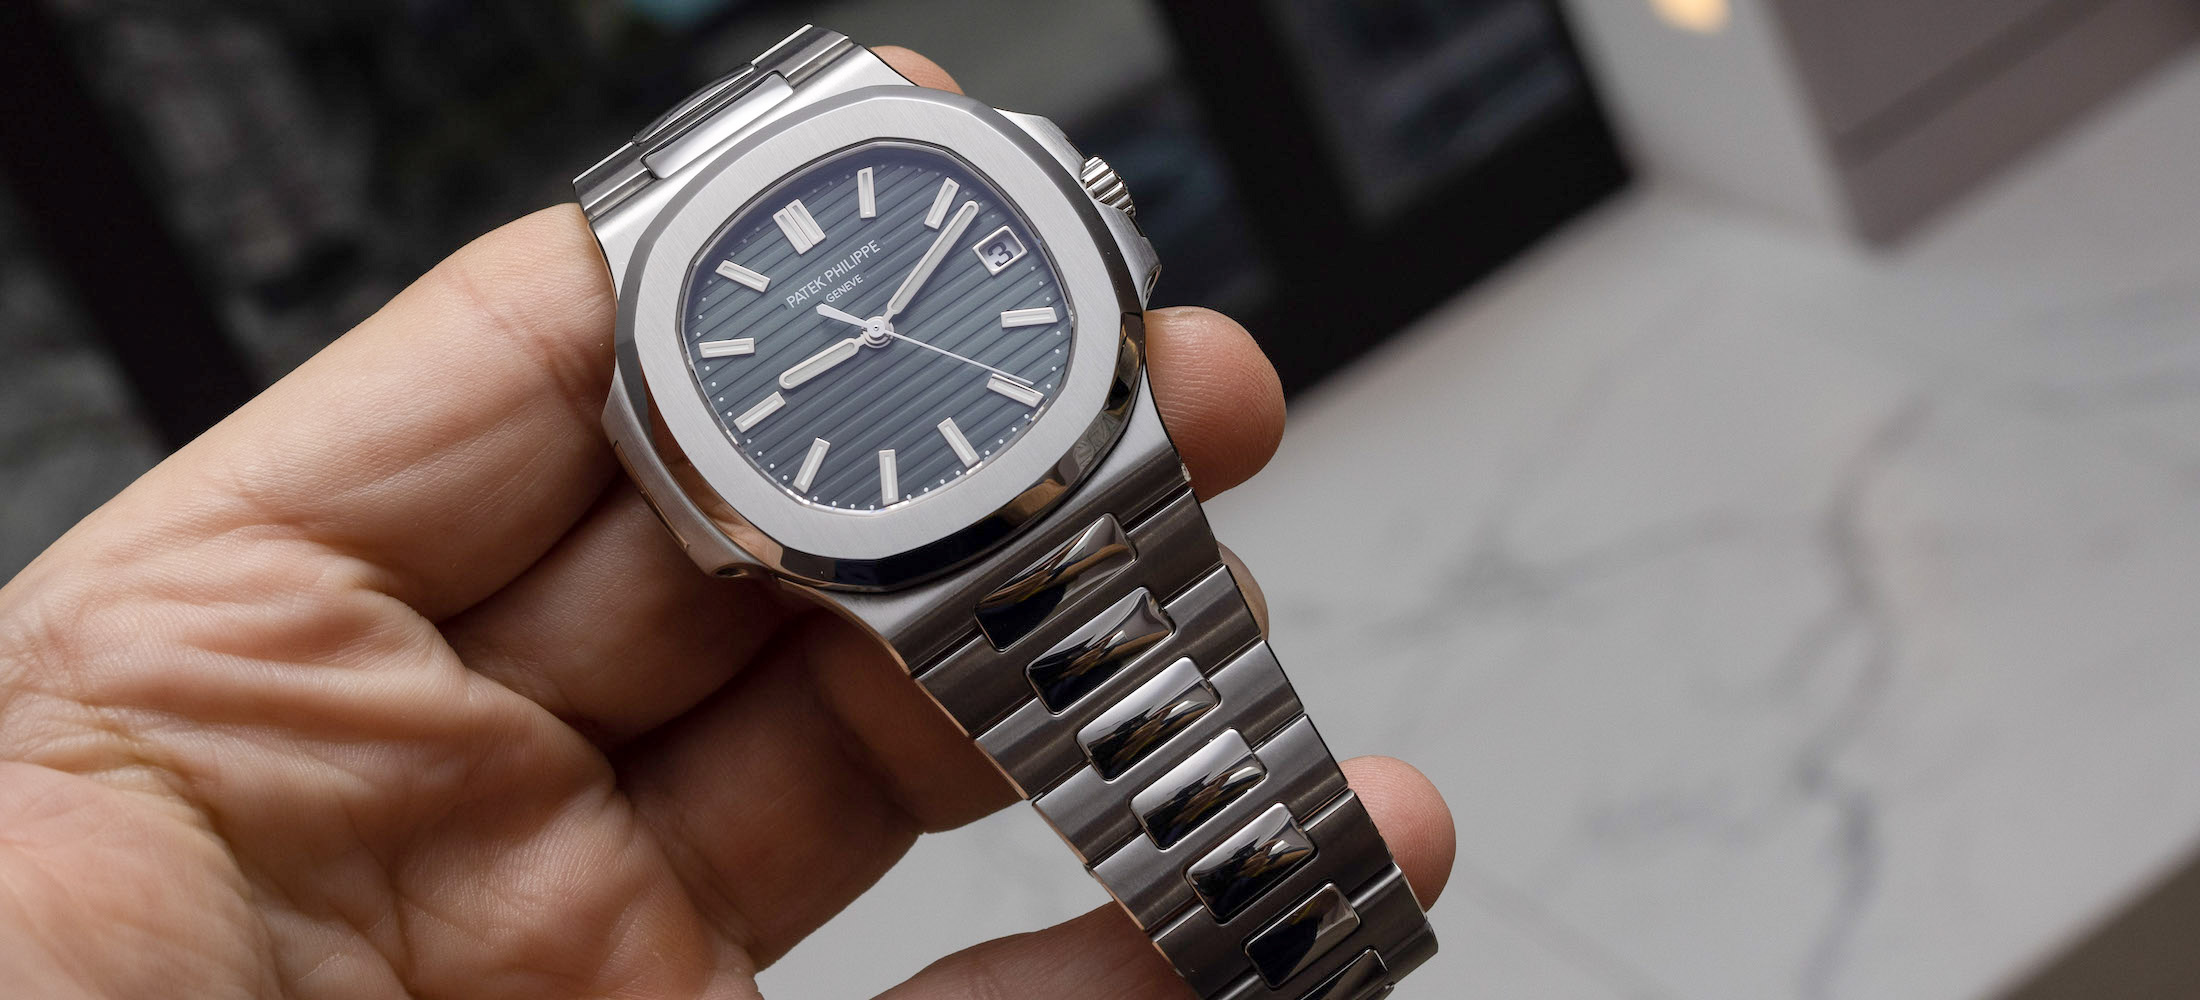 Patek Philippe Nautilus Tiffany Dial With ruby bezel  Patek philippe, Patek  philippe nautilus, Bracelet watch